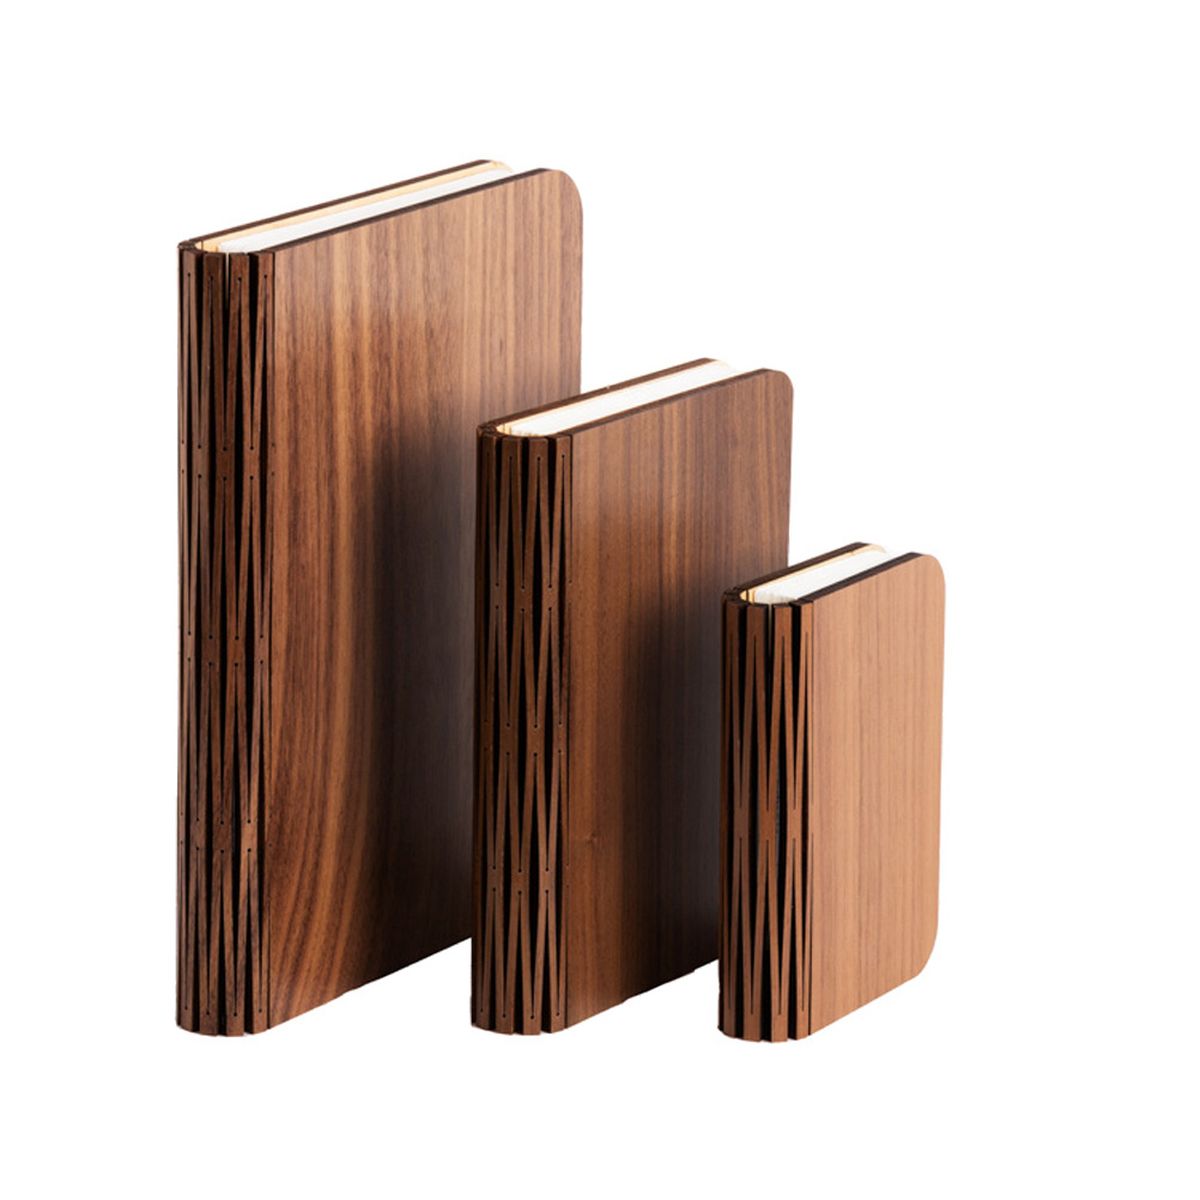 Book lamp in real wood - color Walnut - Size L